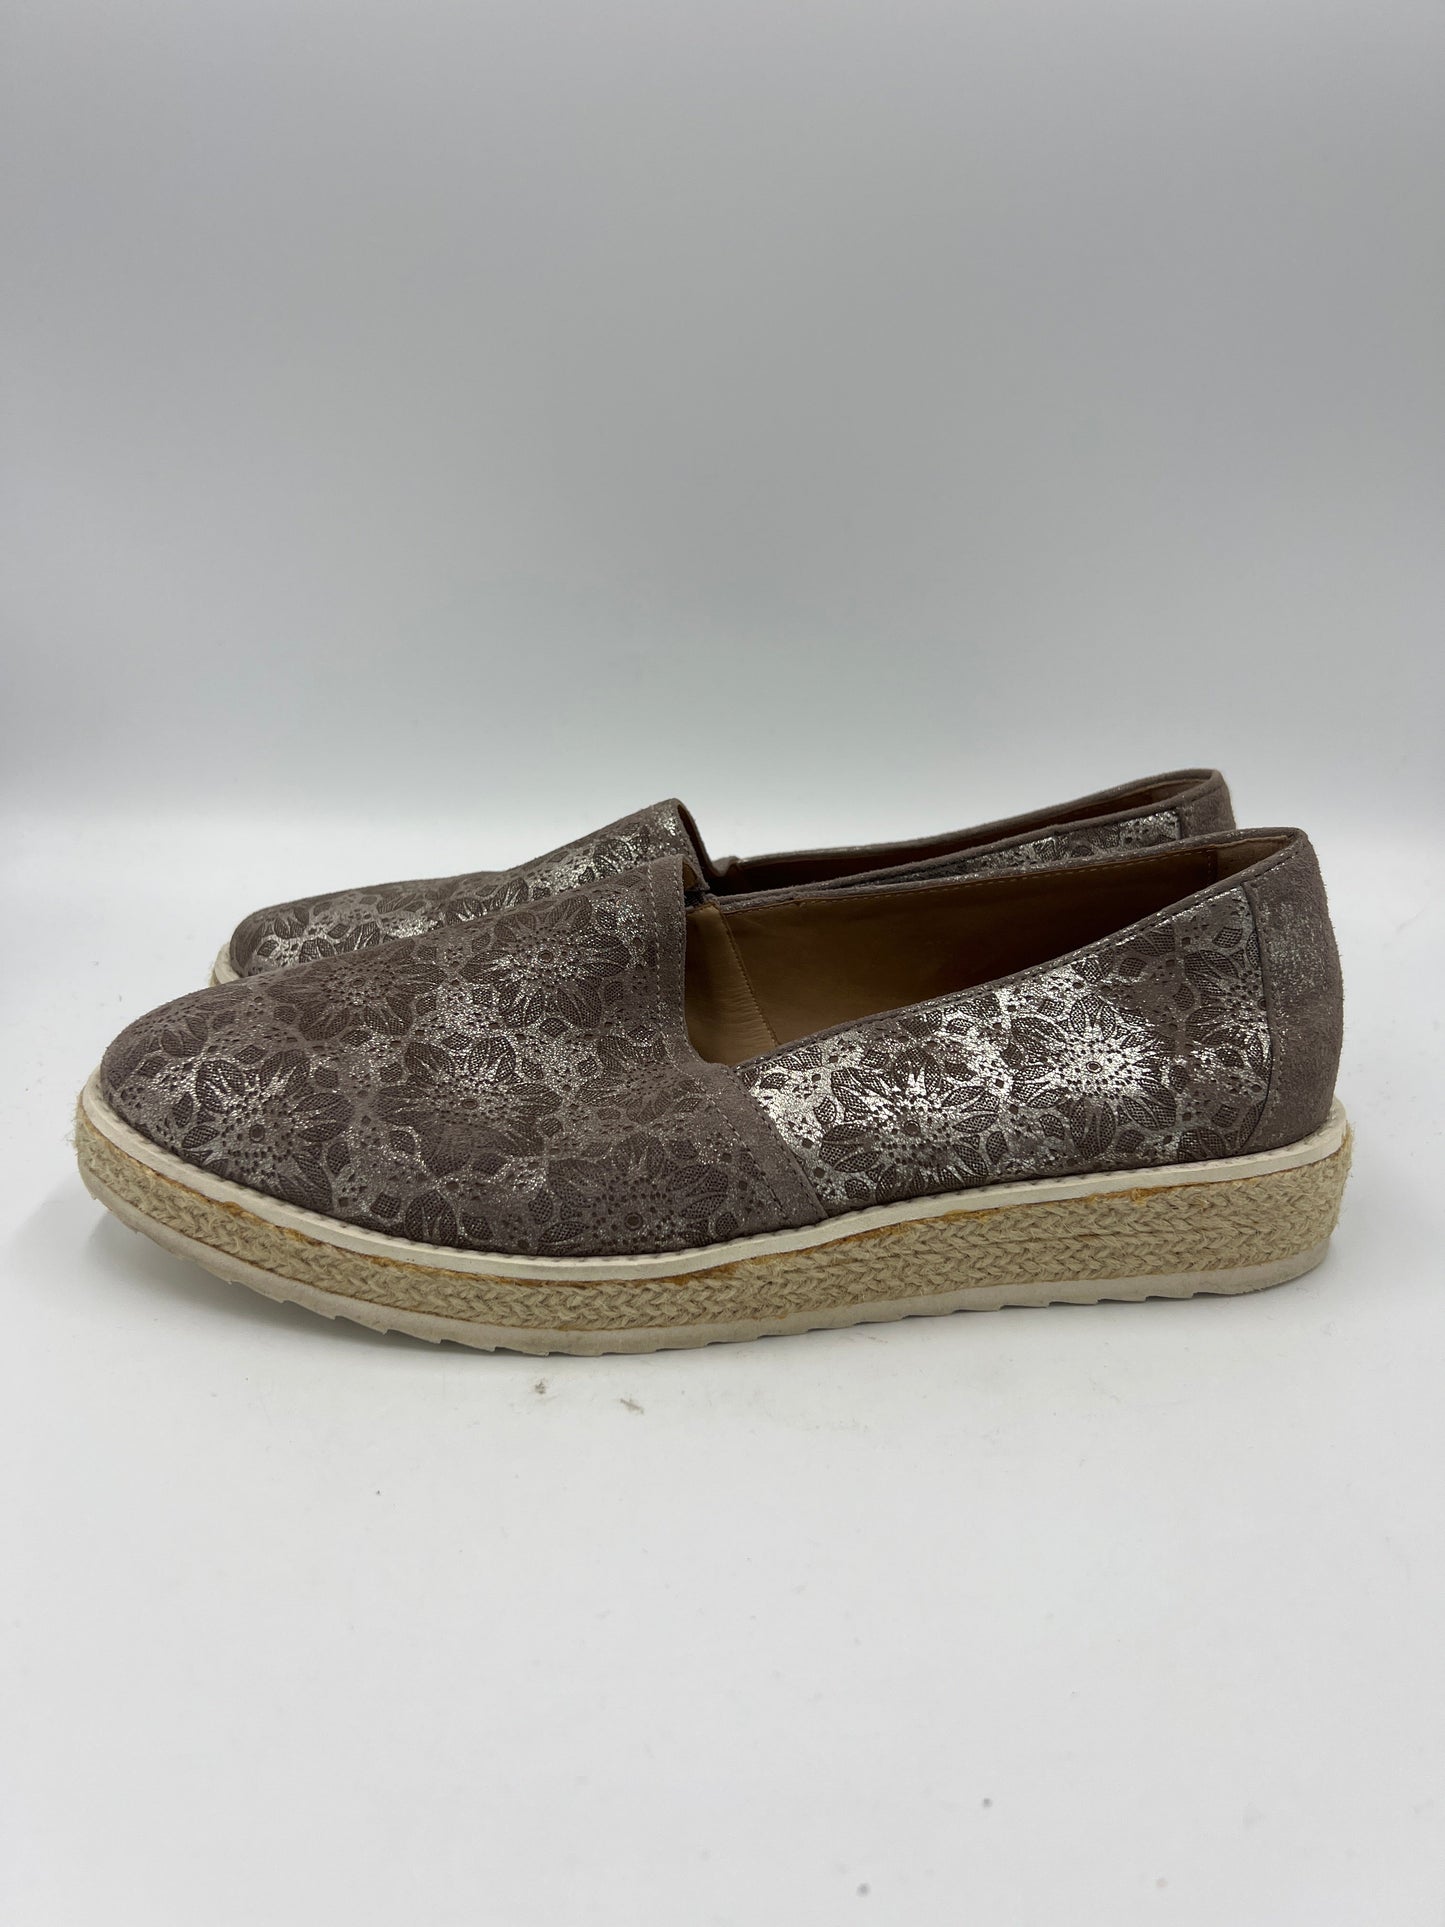 Shoes Flats Espadrille By Trask  Size: 11